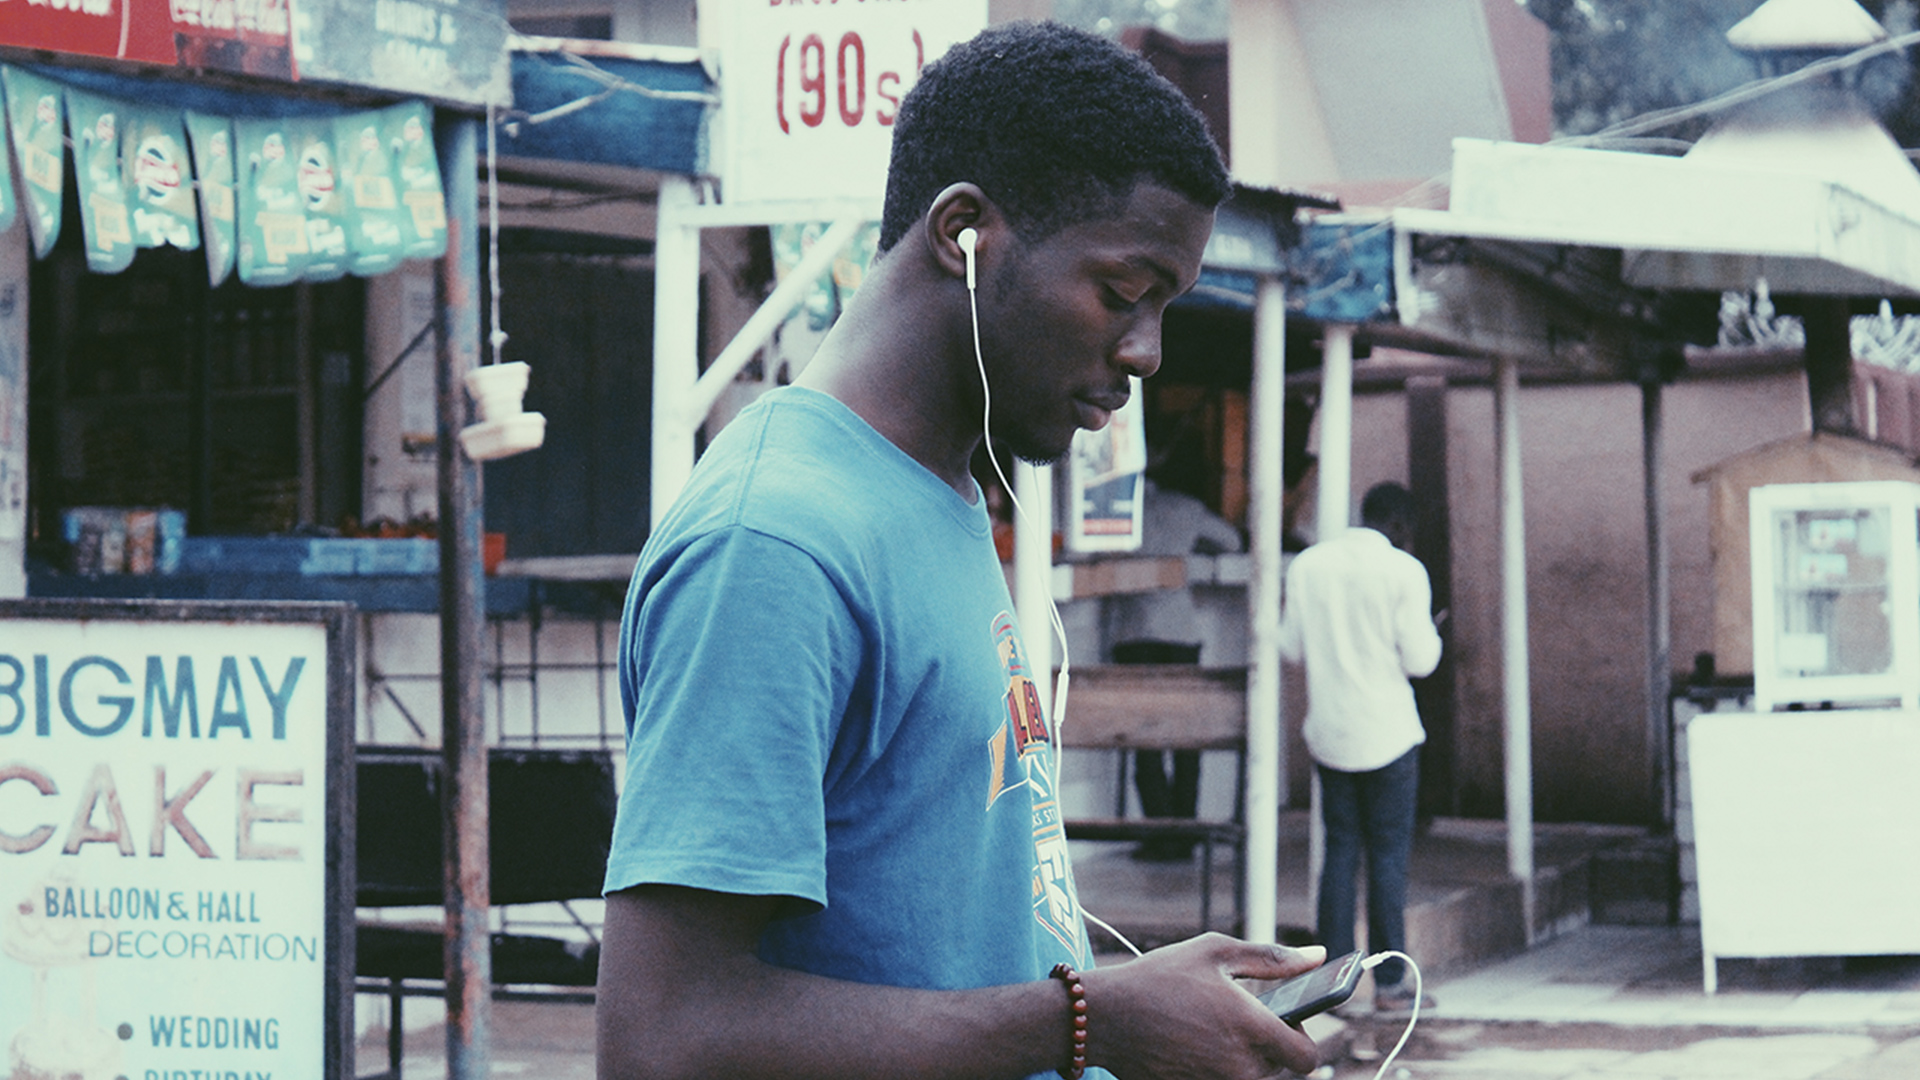 A man listening to music on his phone